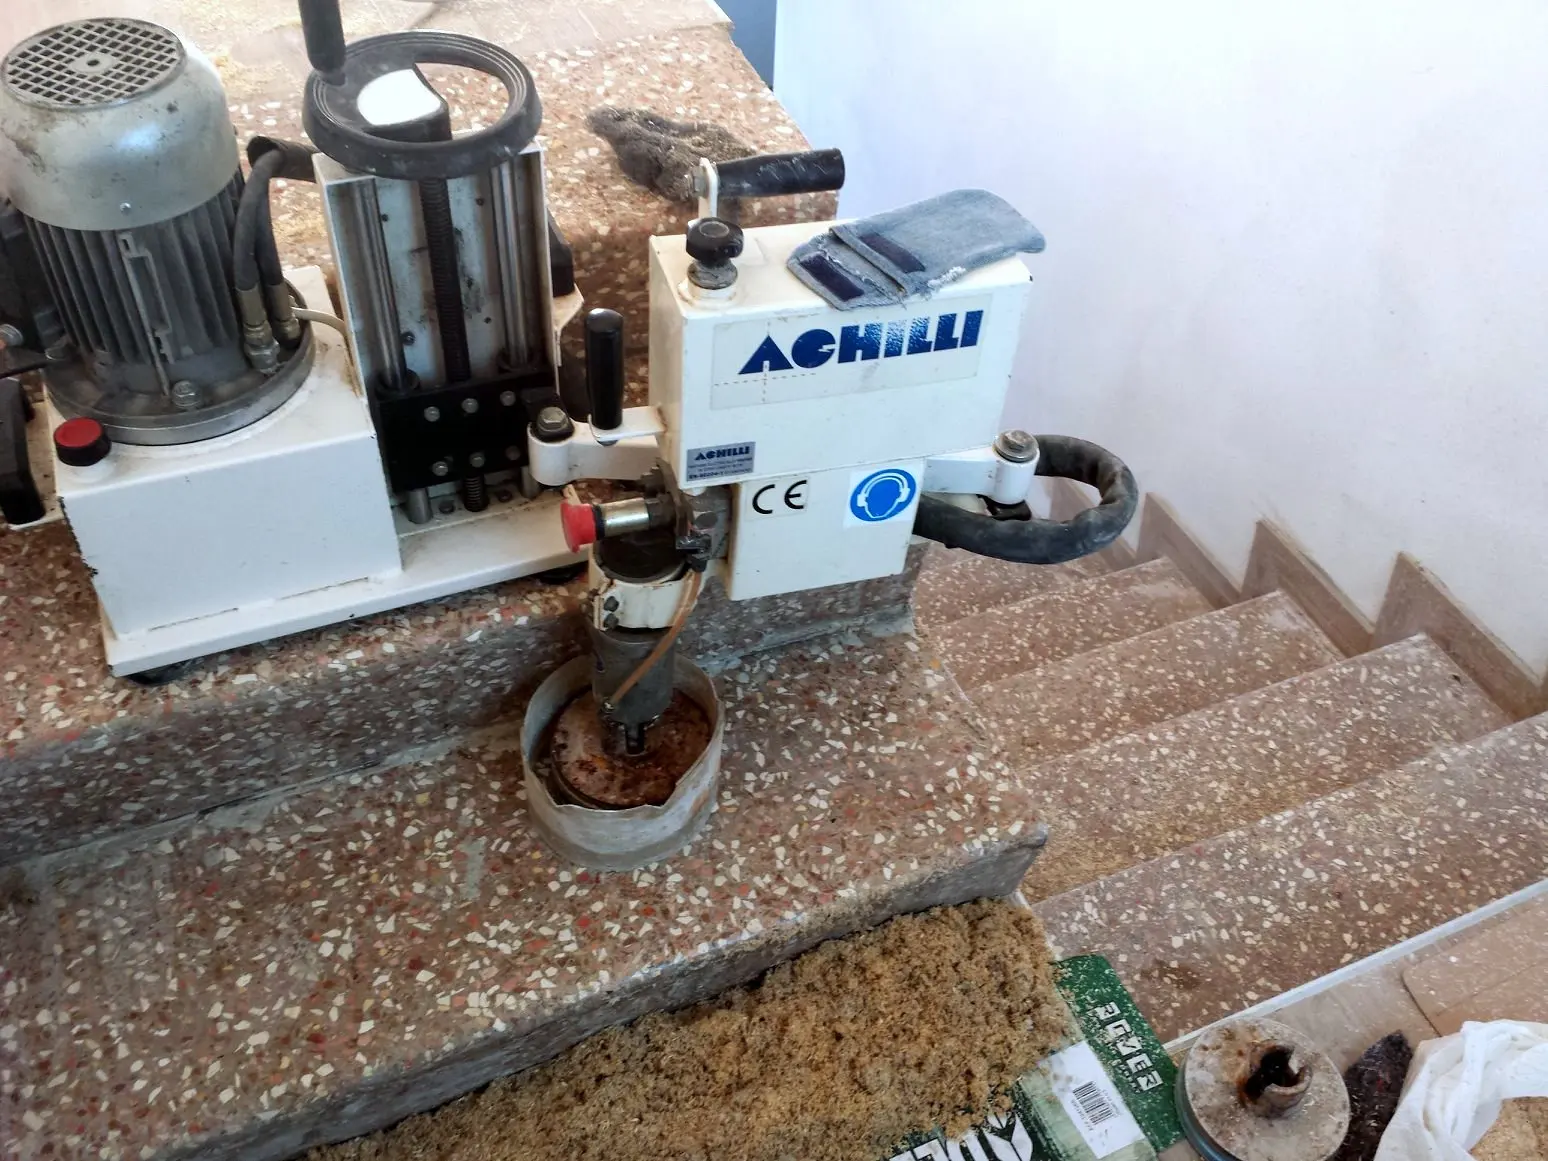 Italian Stone Grinding And Polishing Machine For Steps Ls40 For Marble And Granite Stairs